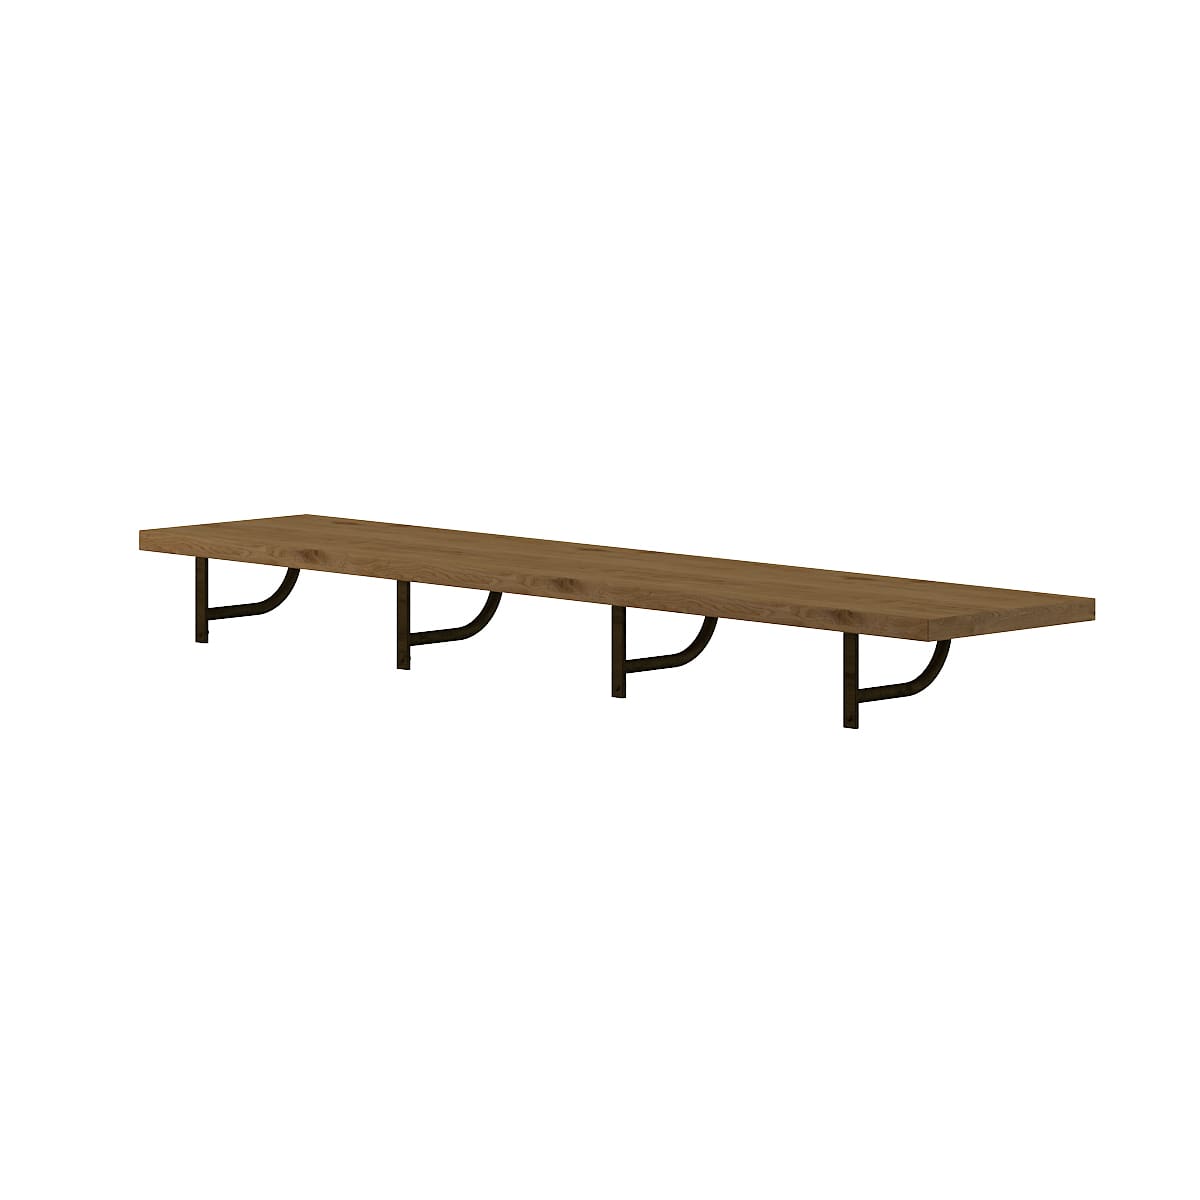 Simple Wooden Table- 3D Model from CGAxis